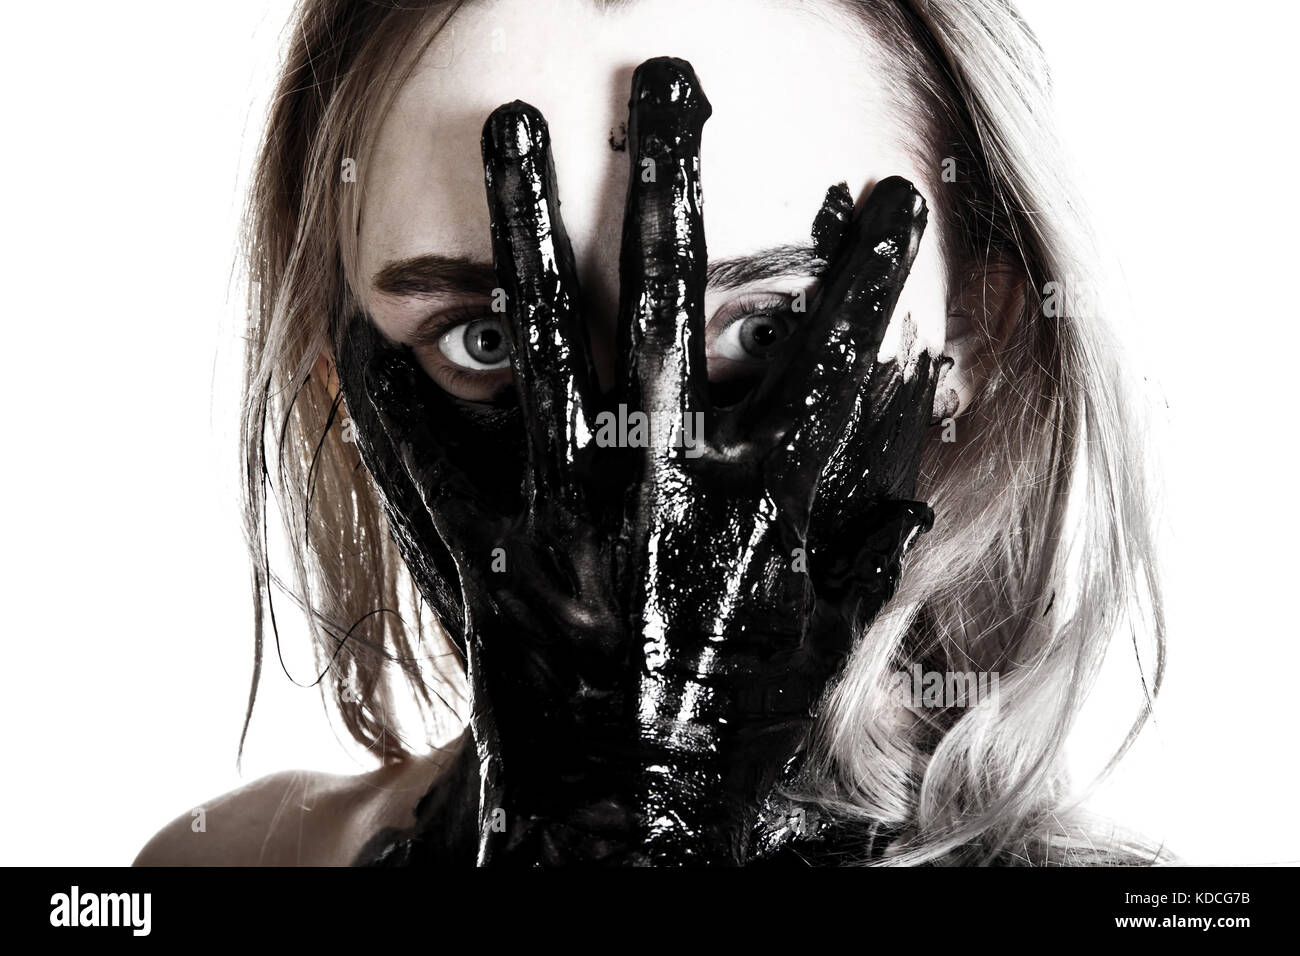 Young woman holding a tarred hand on her face Stock Photo